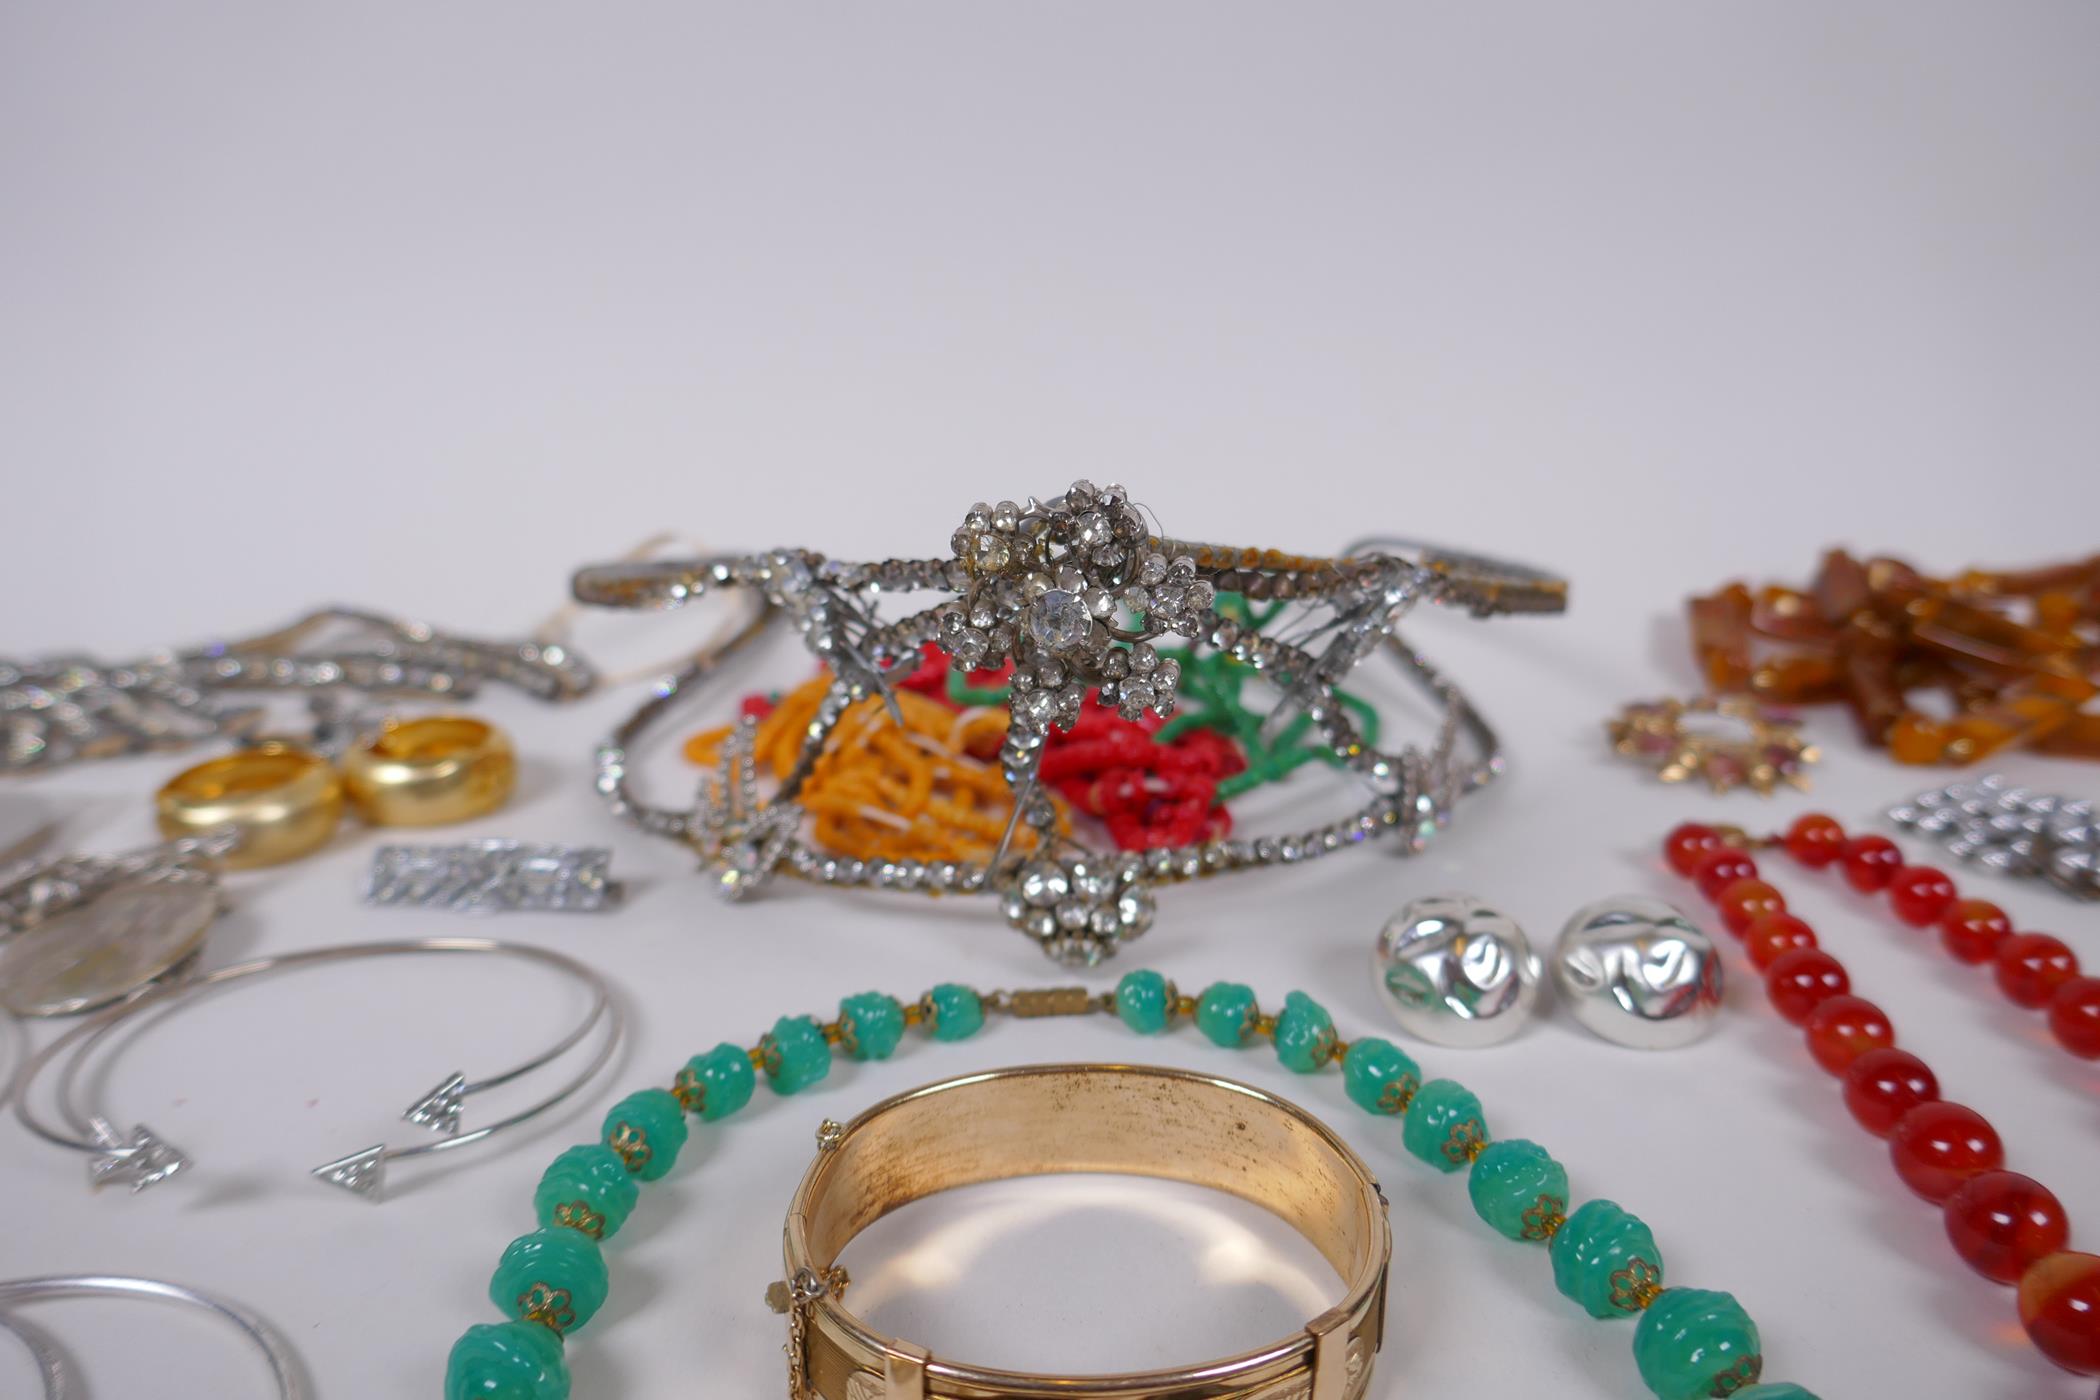 A quantity of vintage costume jewellery including a tiara, bangles, necklaces etc, together with a - Image 2 of 9